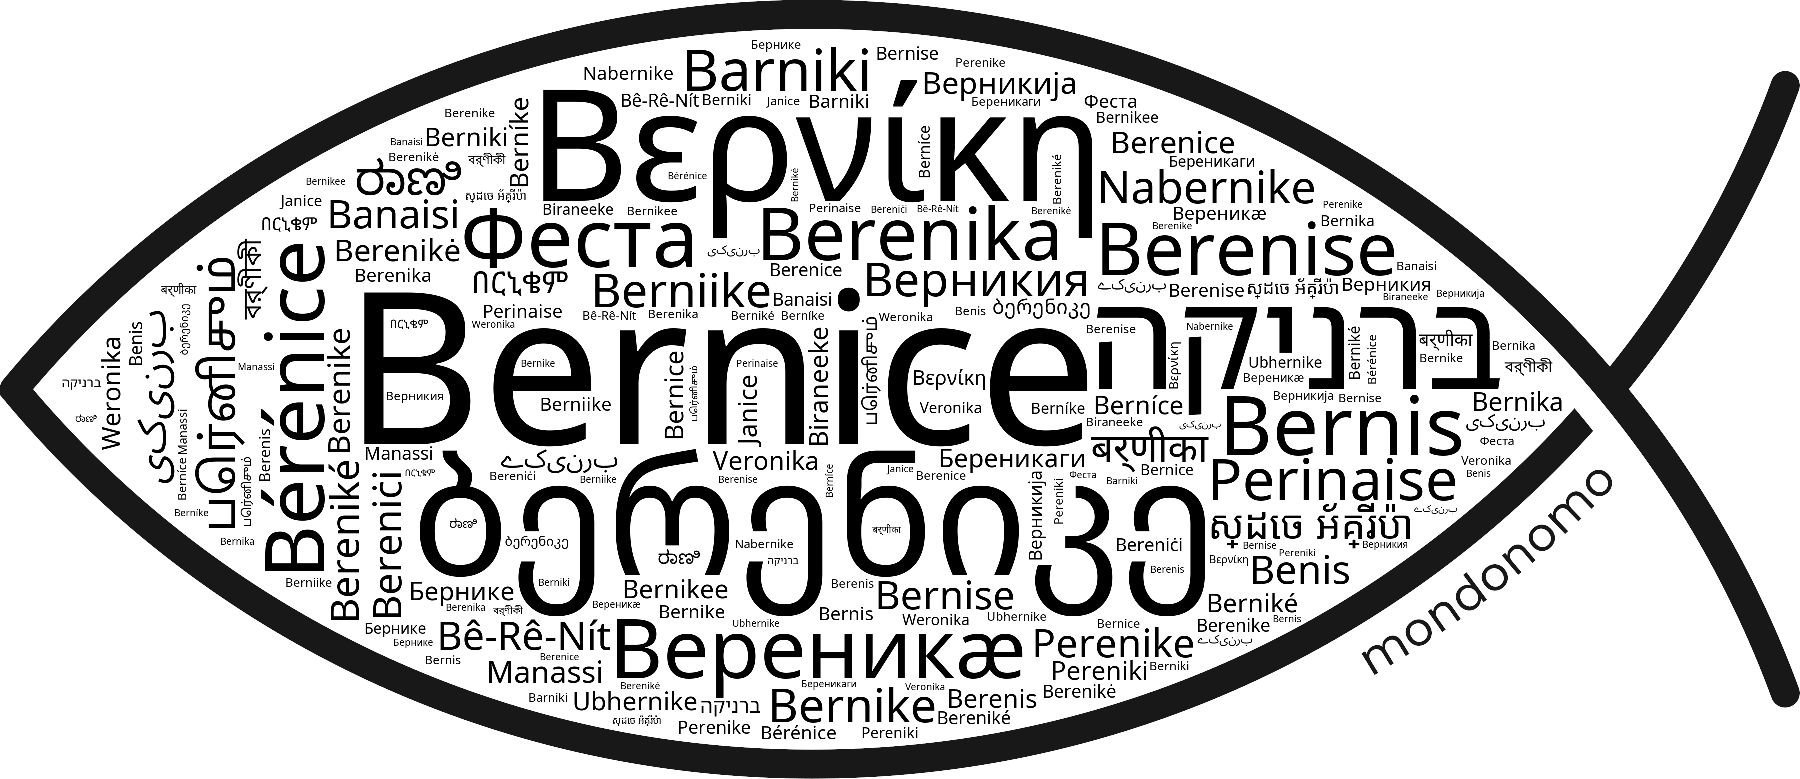 Name Bernice in the world's Bibles